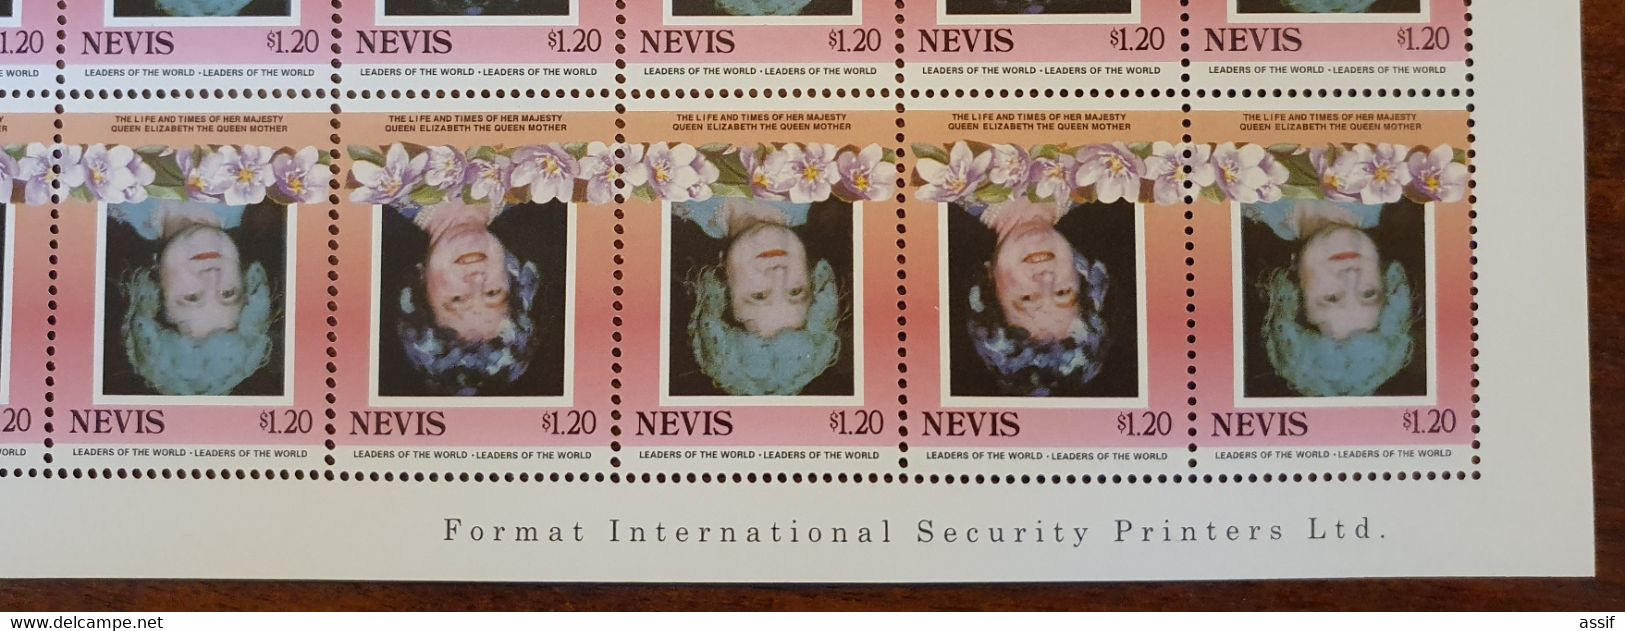 NEVIS 1,20$ 1985 FEUILLE ENTIERE CENTRE RENVERSE SHEET INVERTED YT 315 Et 316 50 TIMBRES NEUFS ** /FREE SHIPPING R - St.Kitts E Nevis ( 1983-...)